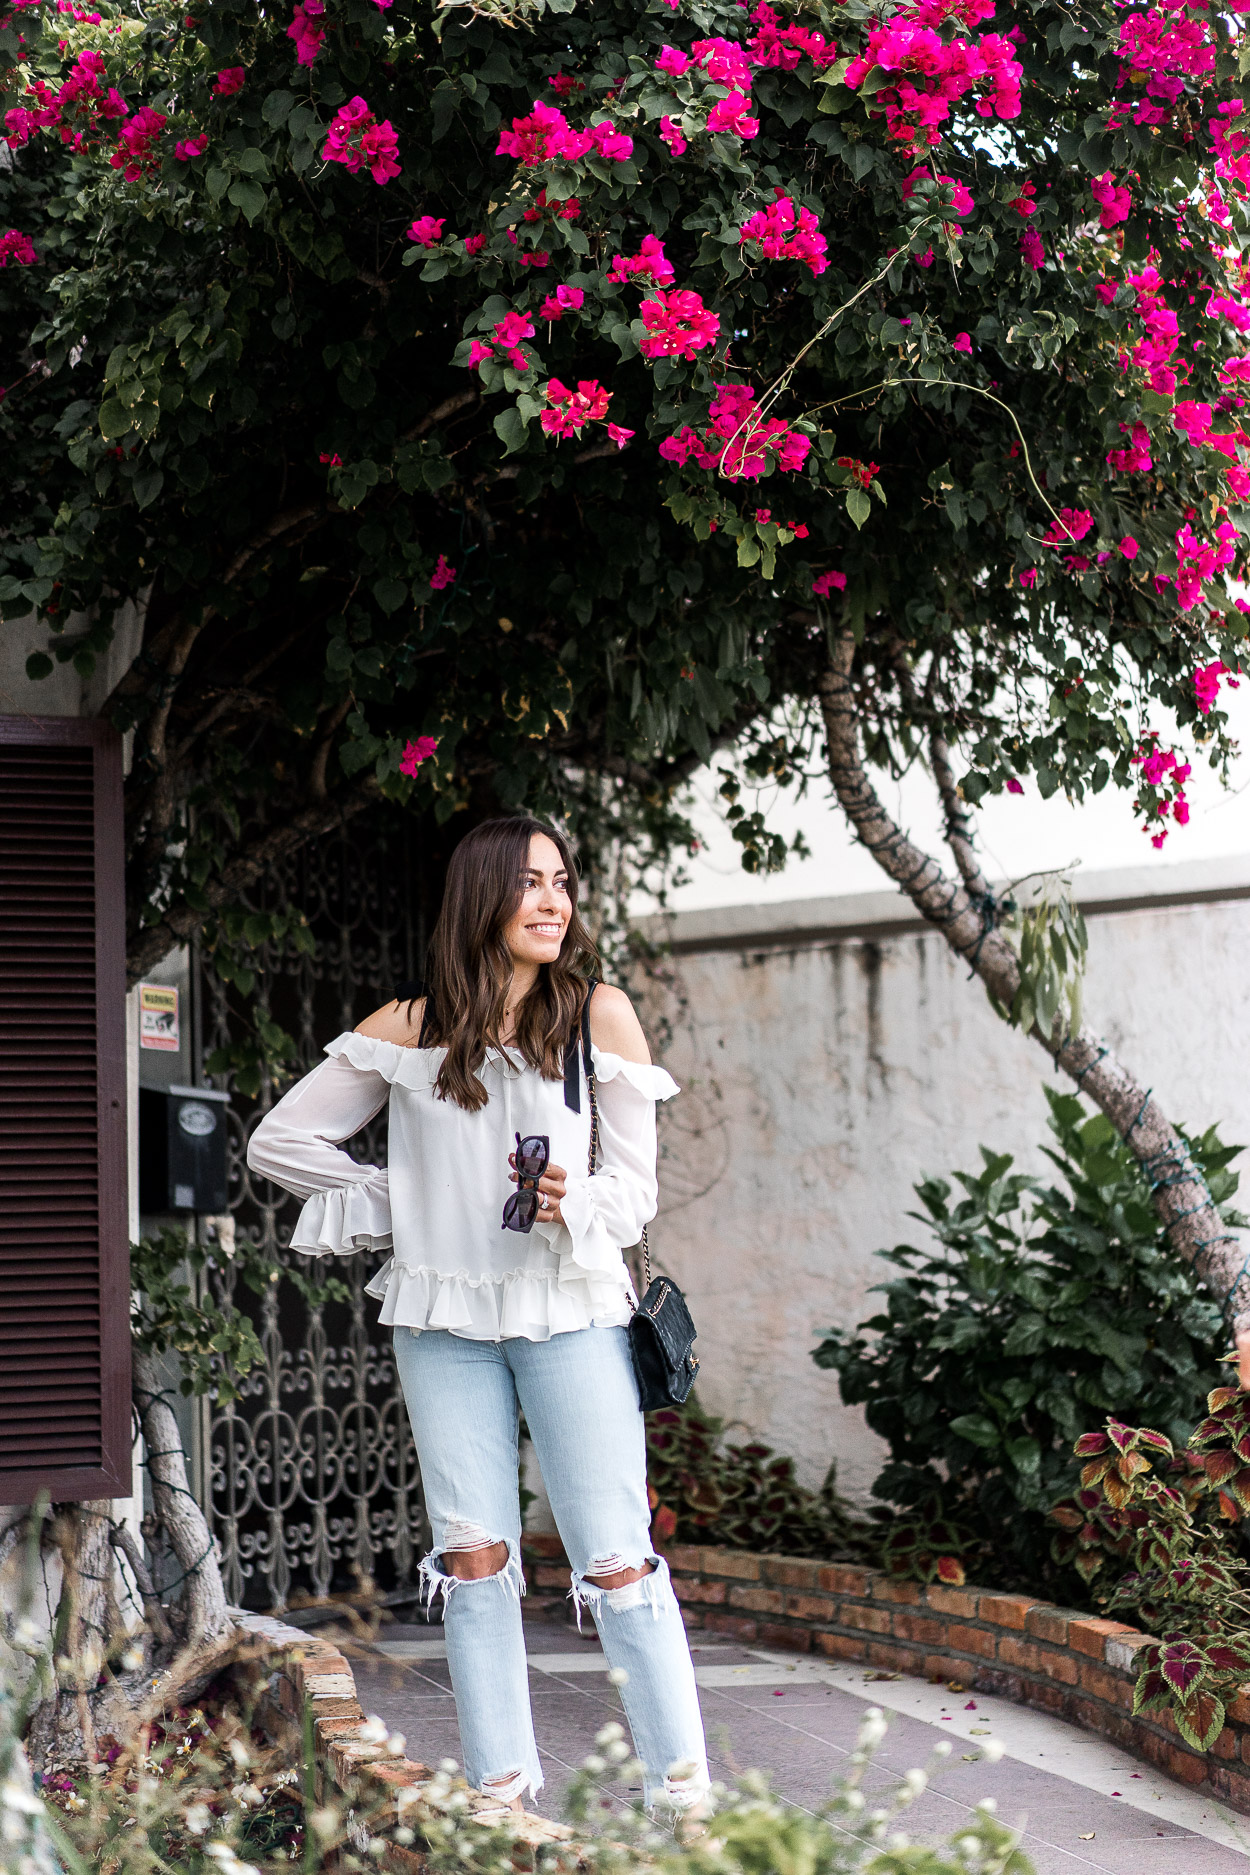 ruffled blouse by Cece with jeans